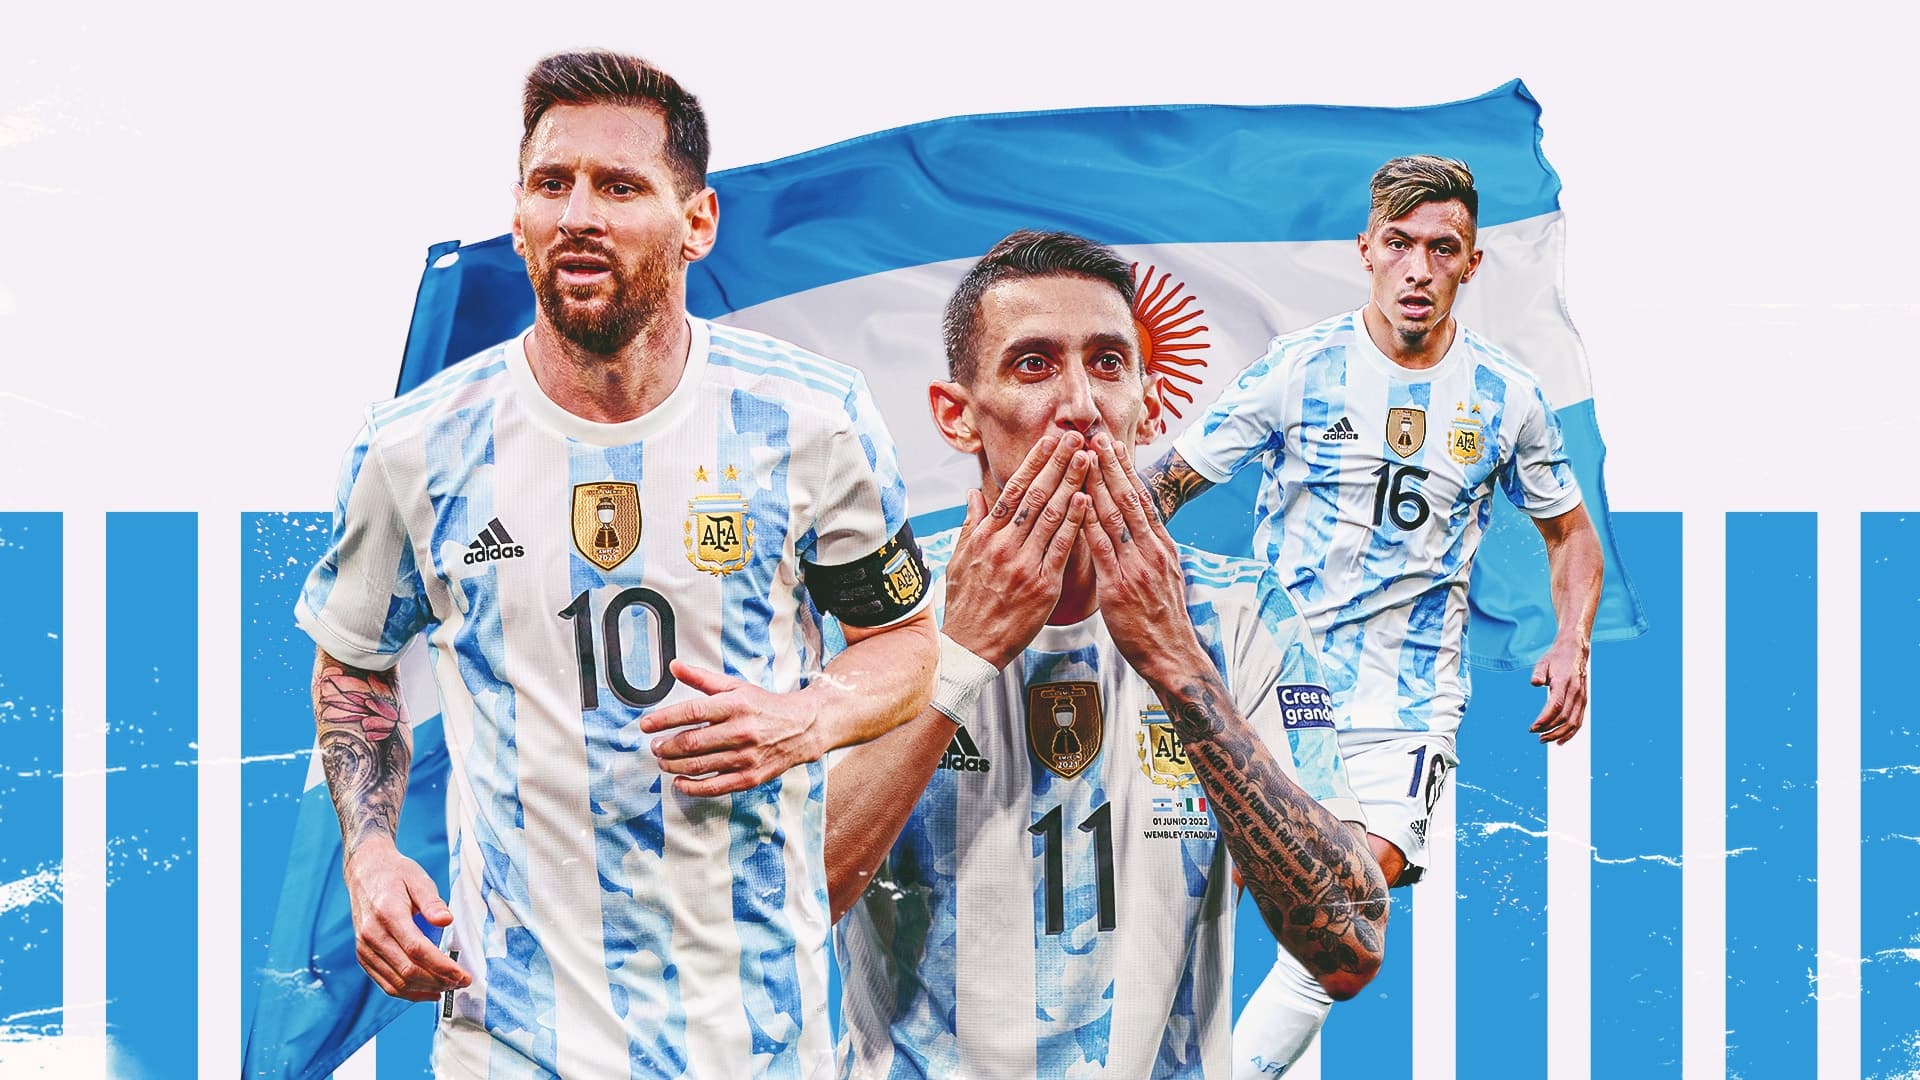 Argentina-Best Soccer Countries in the World